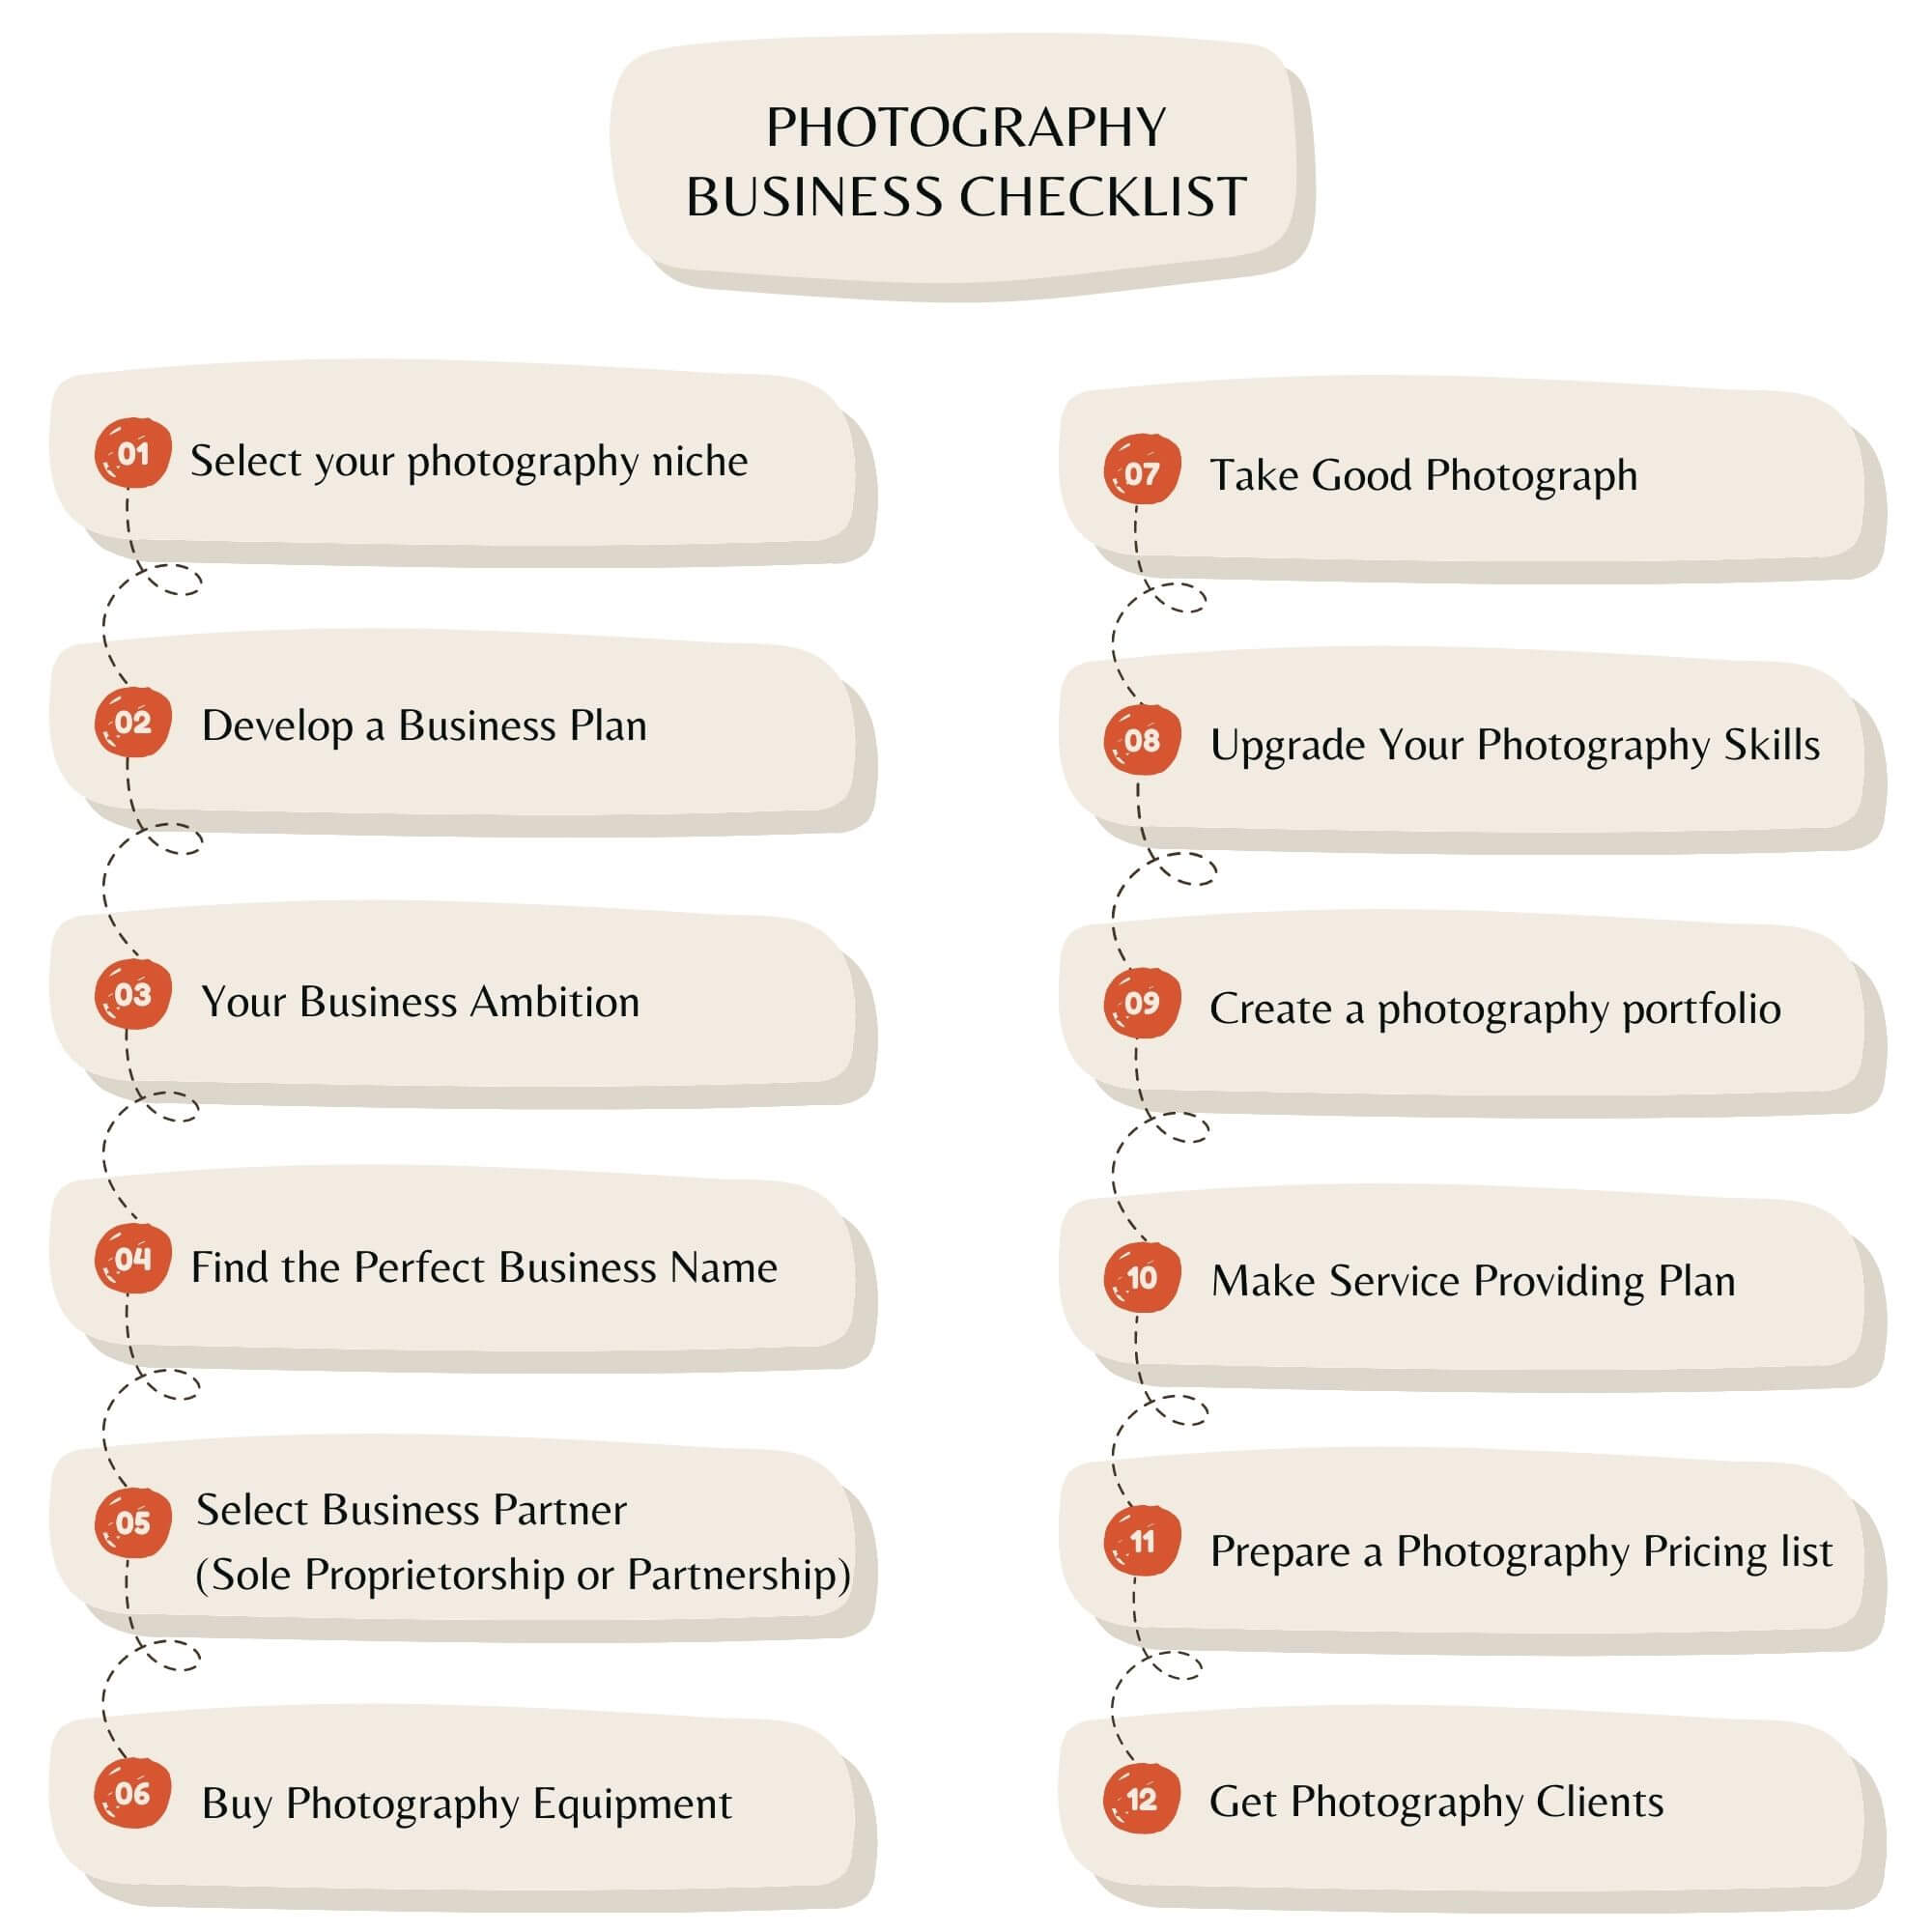 Photography Business Checklist: What Do You Need to Start a Photography Business?